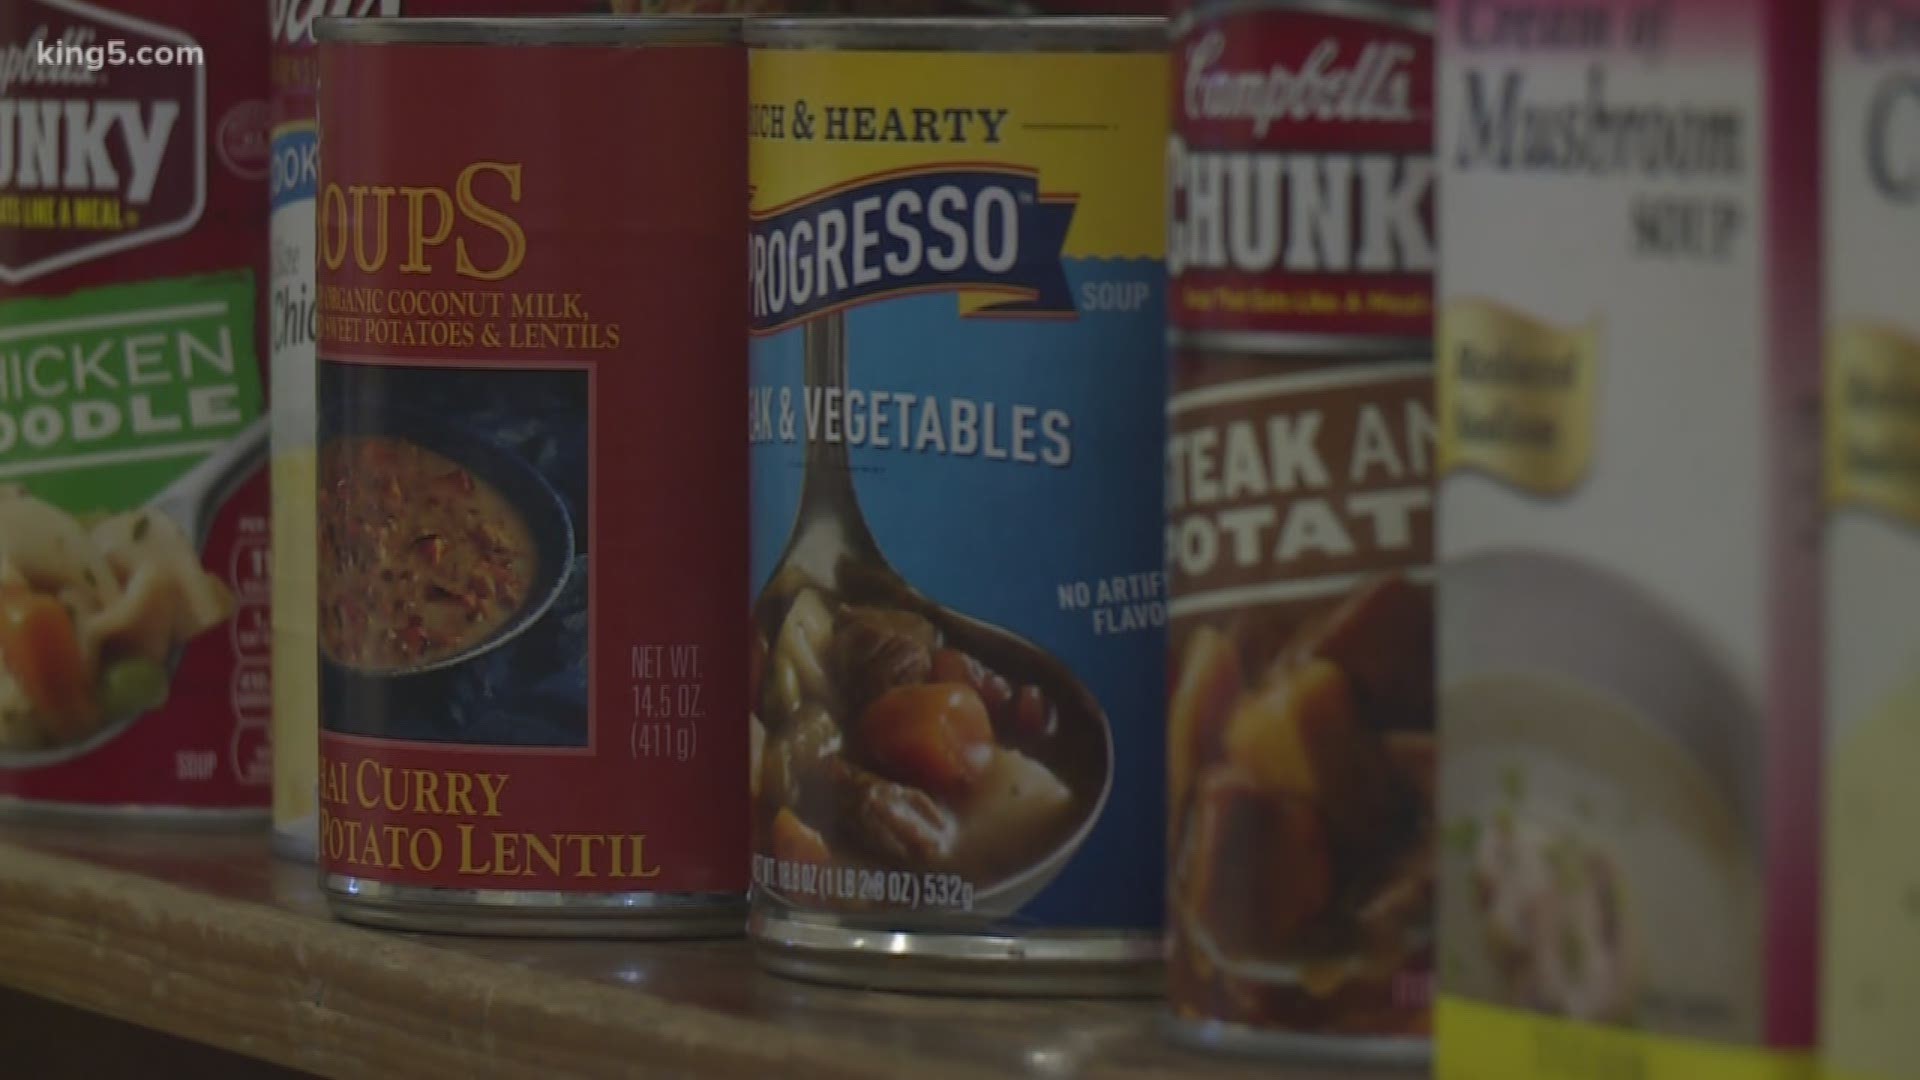 As workers approach one month without a paycheck, food banks have stepped up to help out.